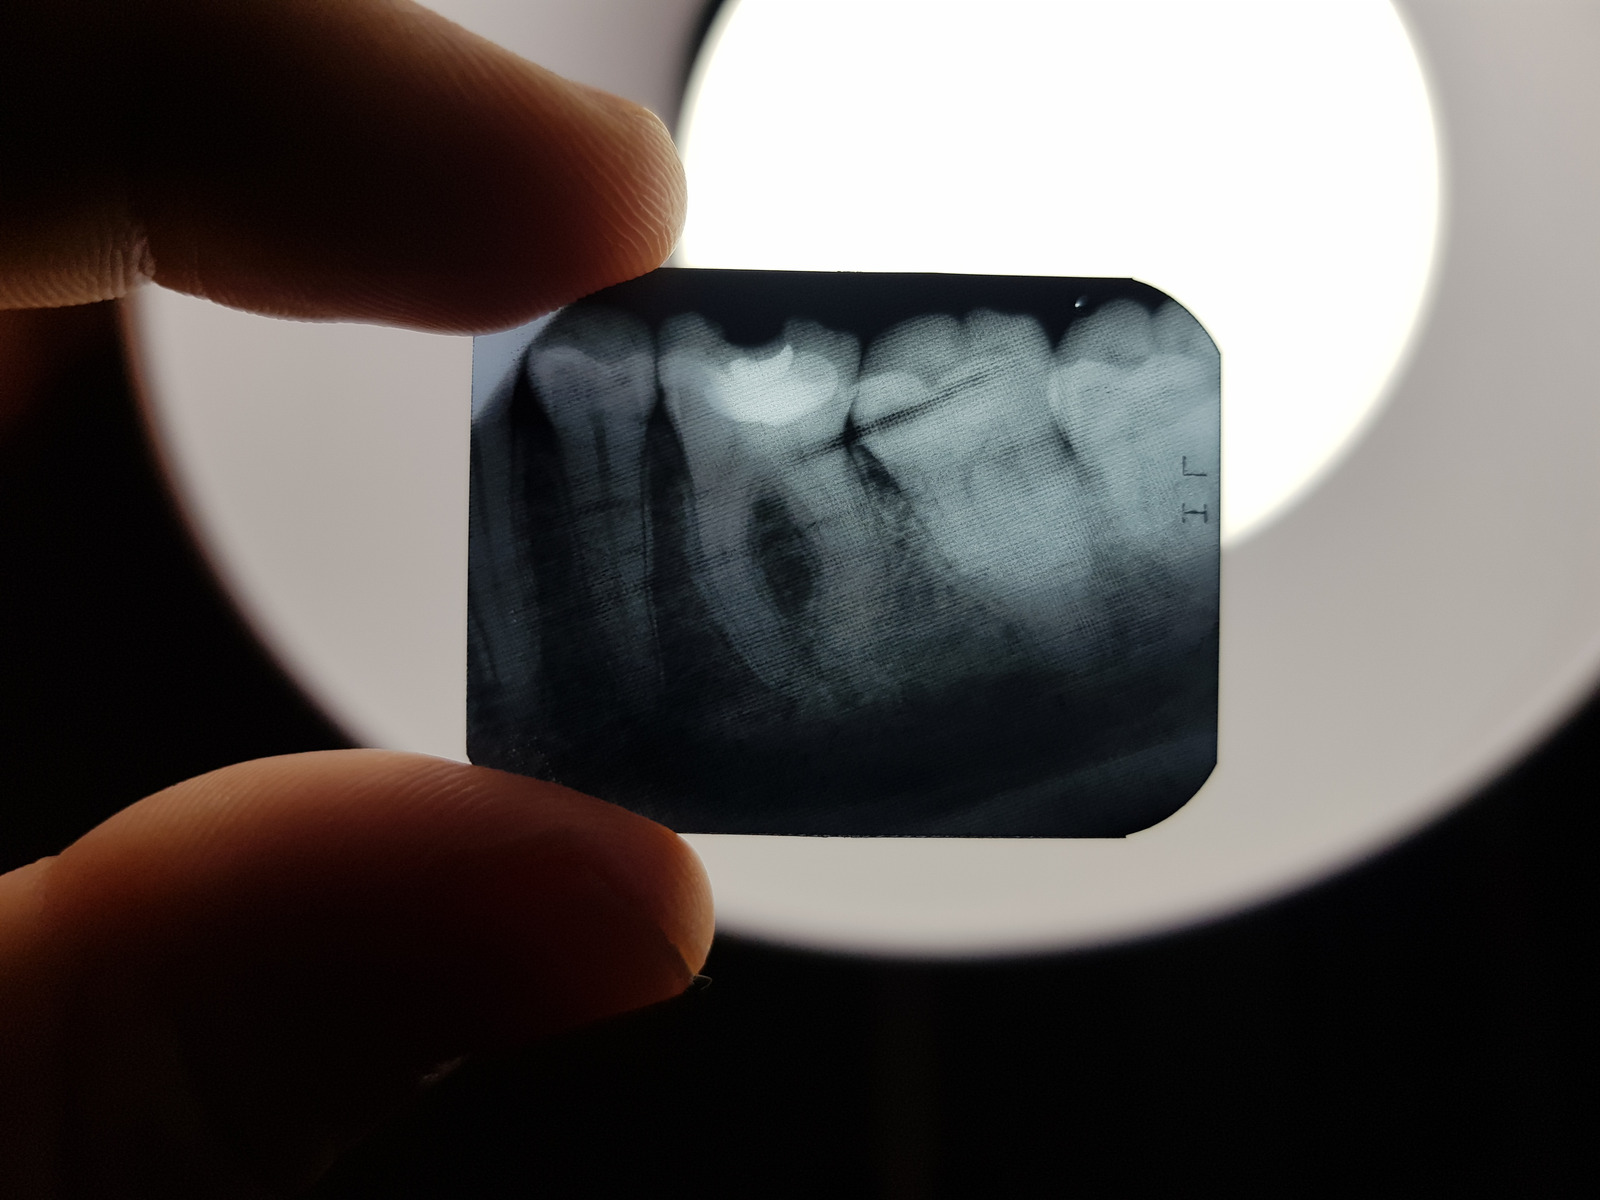 The result of x-ray radiography of the teeth of the oral cavity of the patient to be treated in dentistry